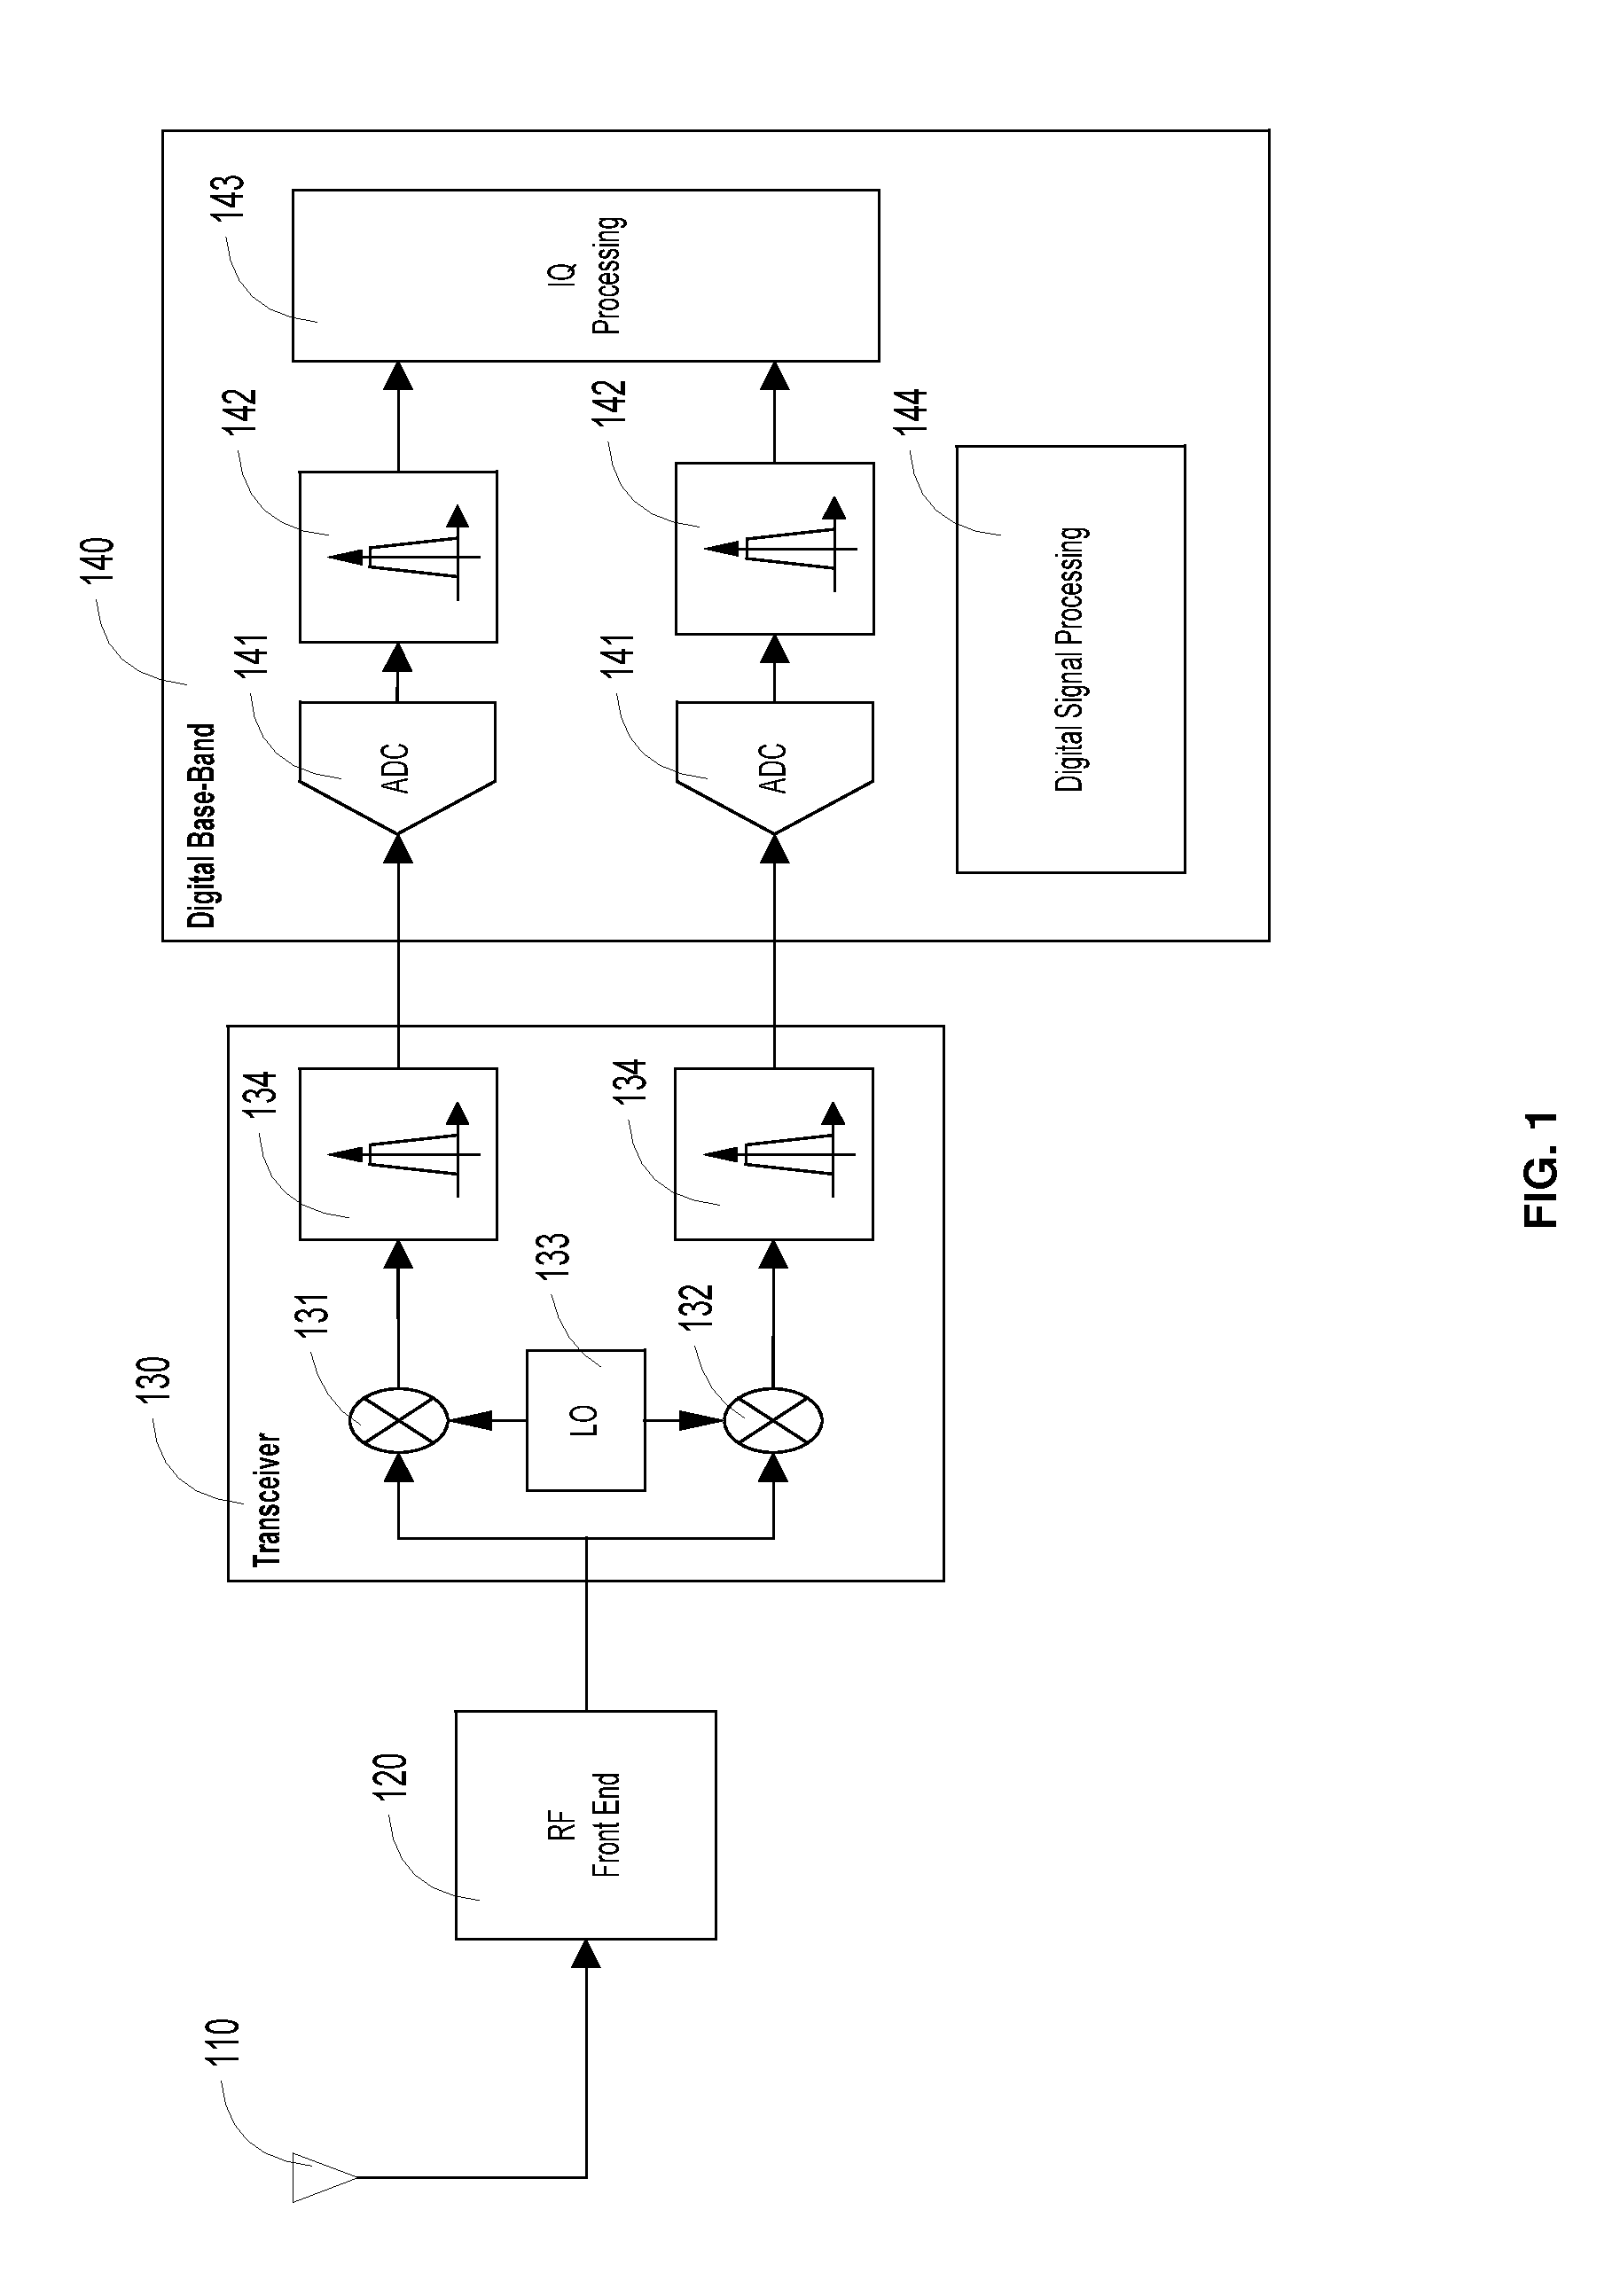 Wireless communication receiver with i/q imbalance estimation and correction techniques